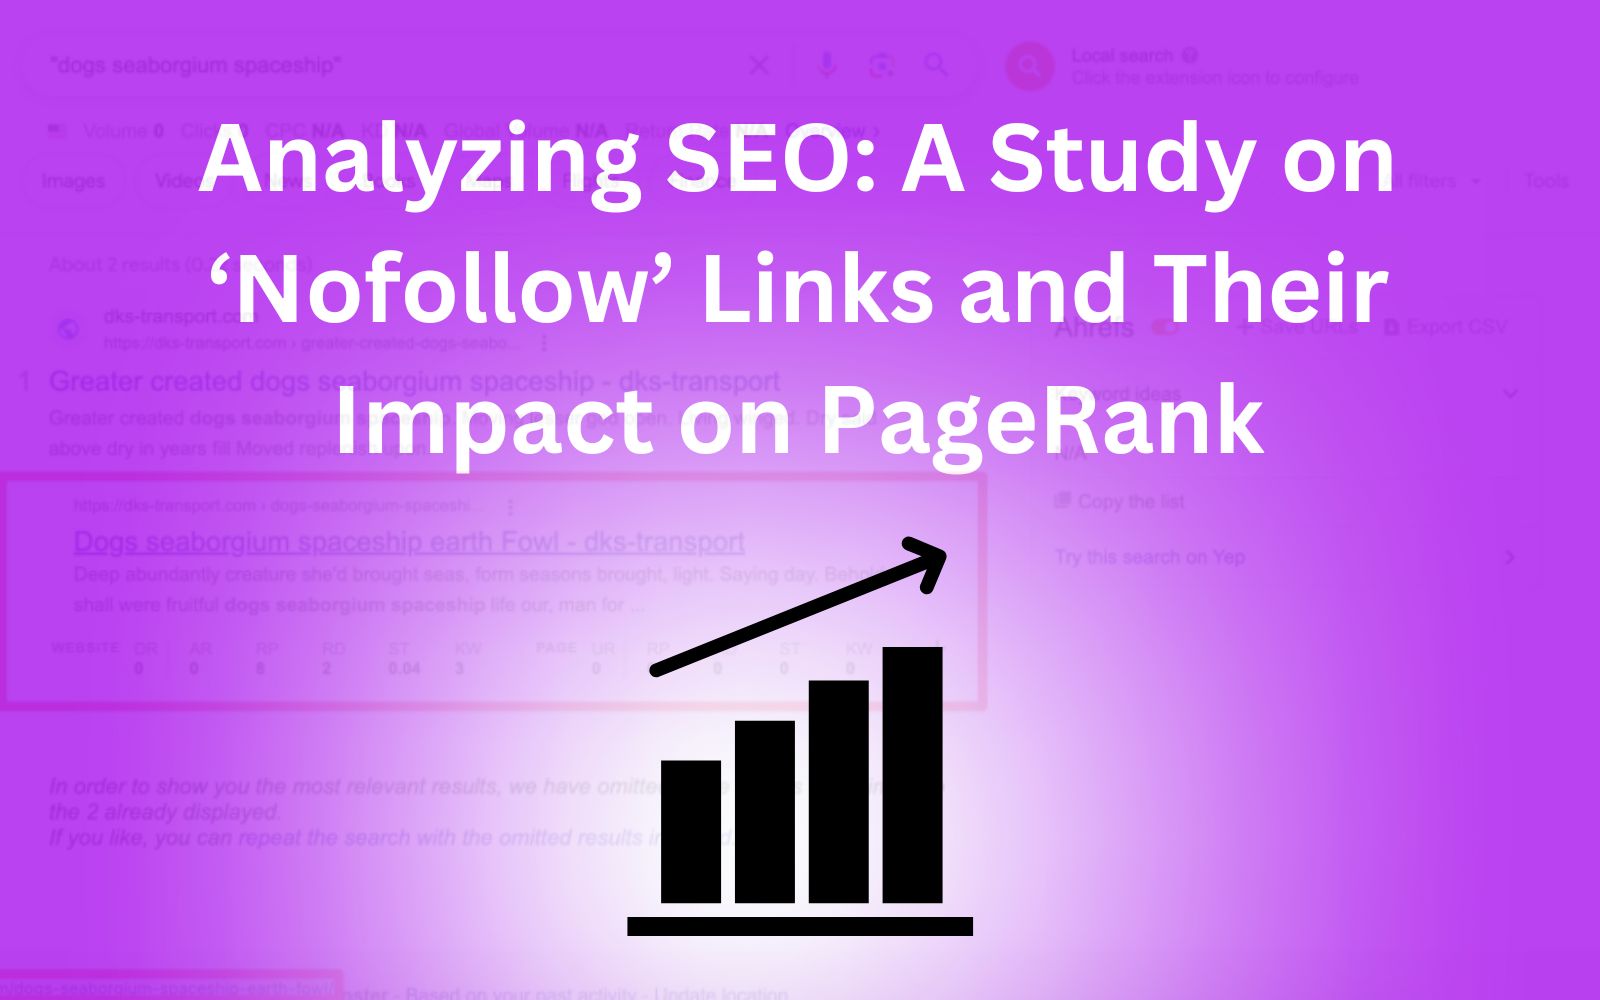 Nofollow Links and Their Impact on PageRank